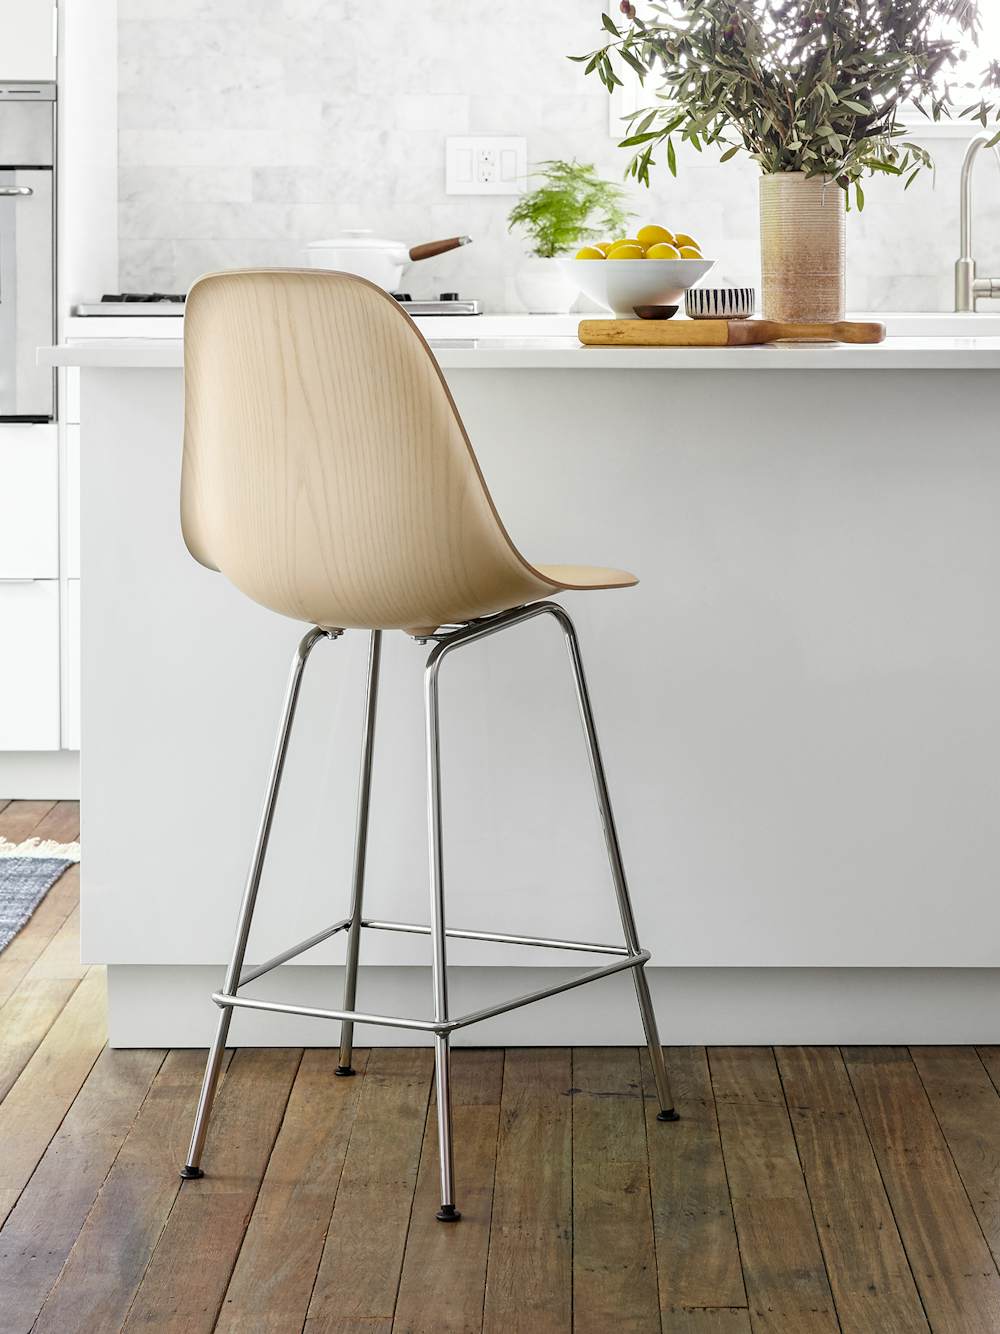  Eames Dining stool